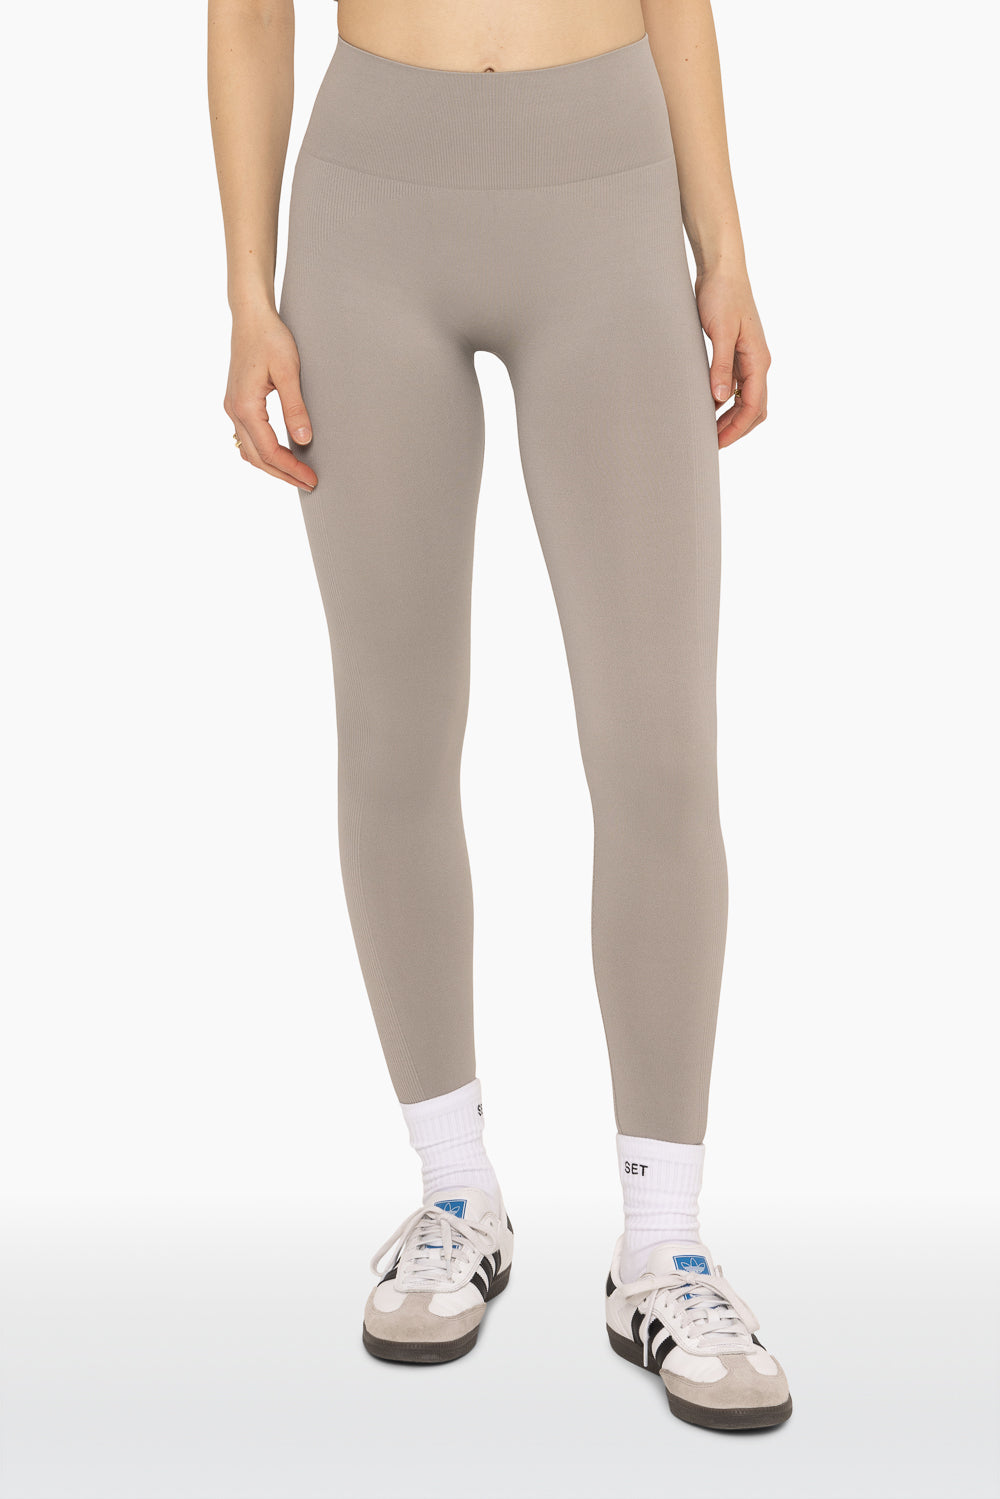 Get Obsessed with the Must-Have Lululemon Leggings